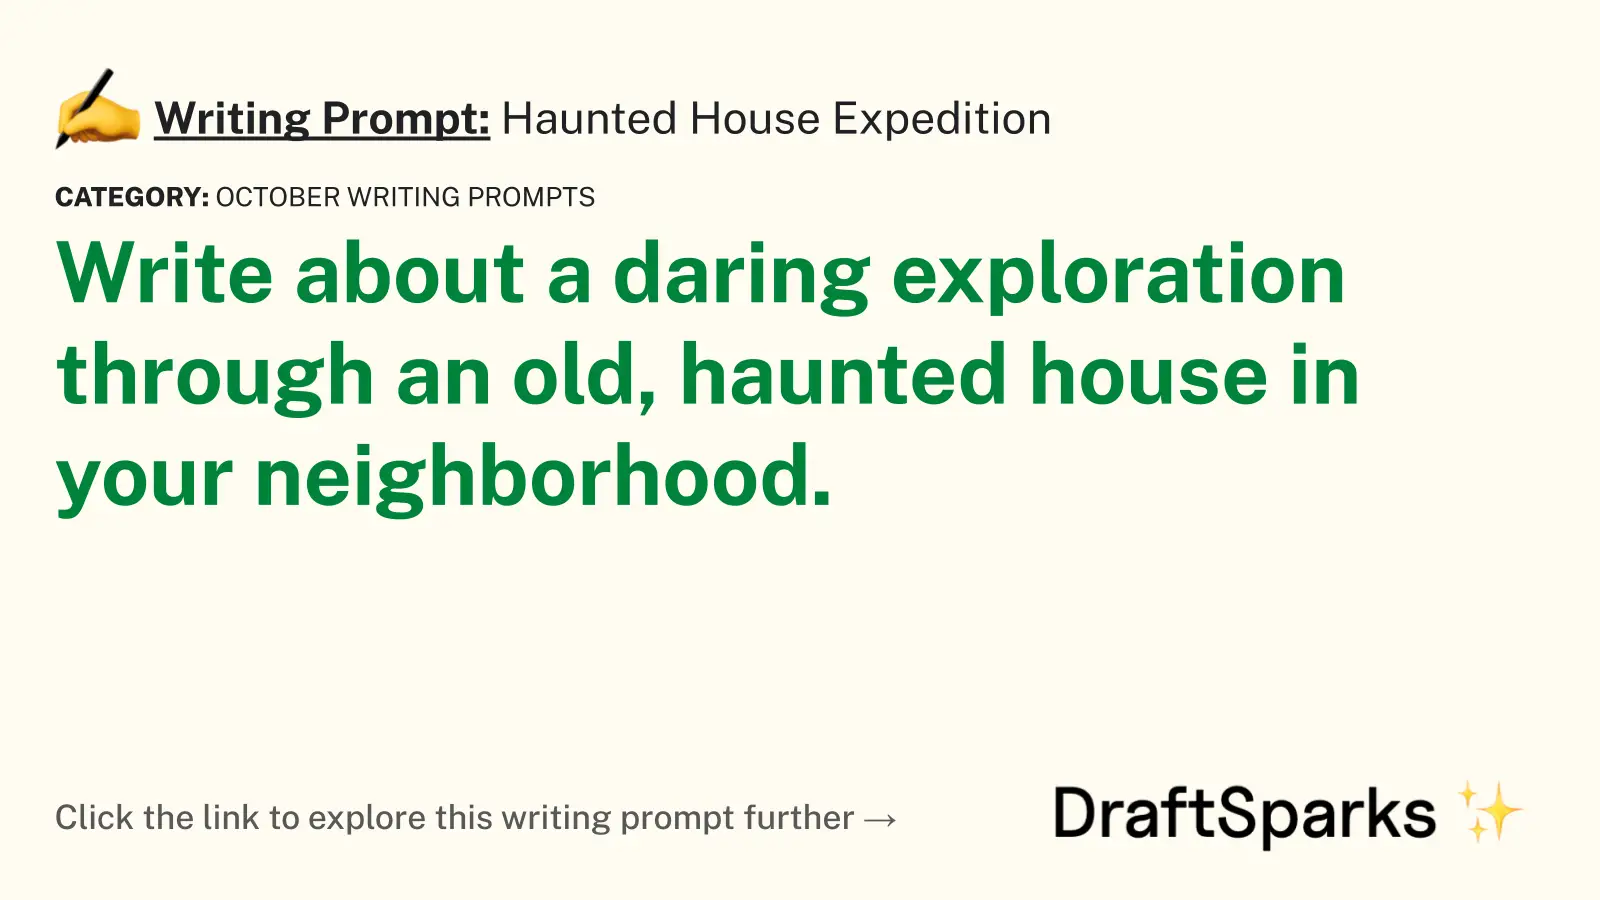 Haunted House Expedition